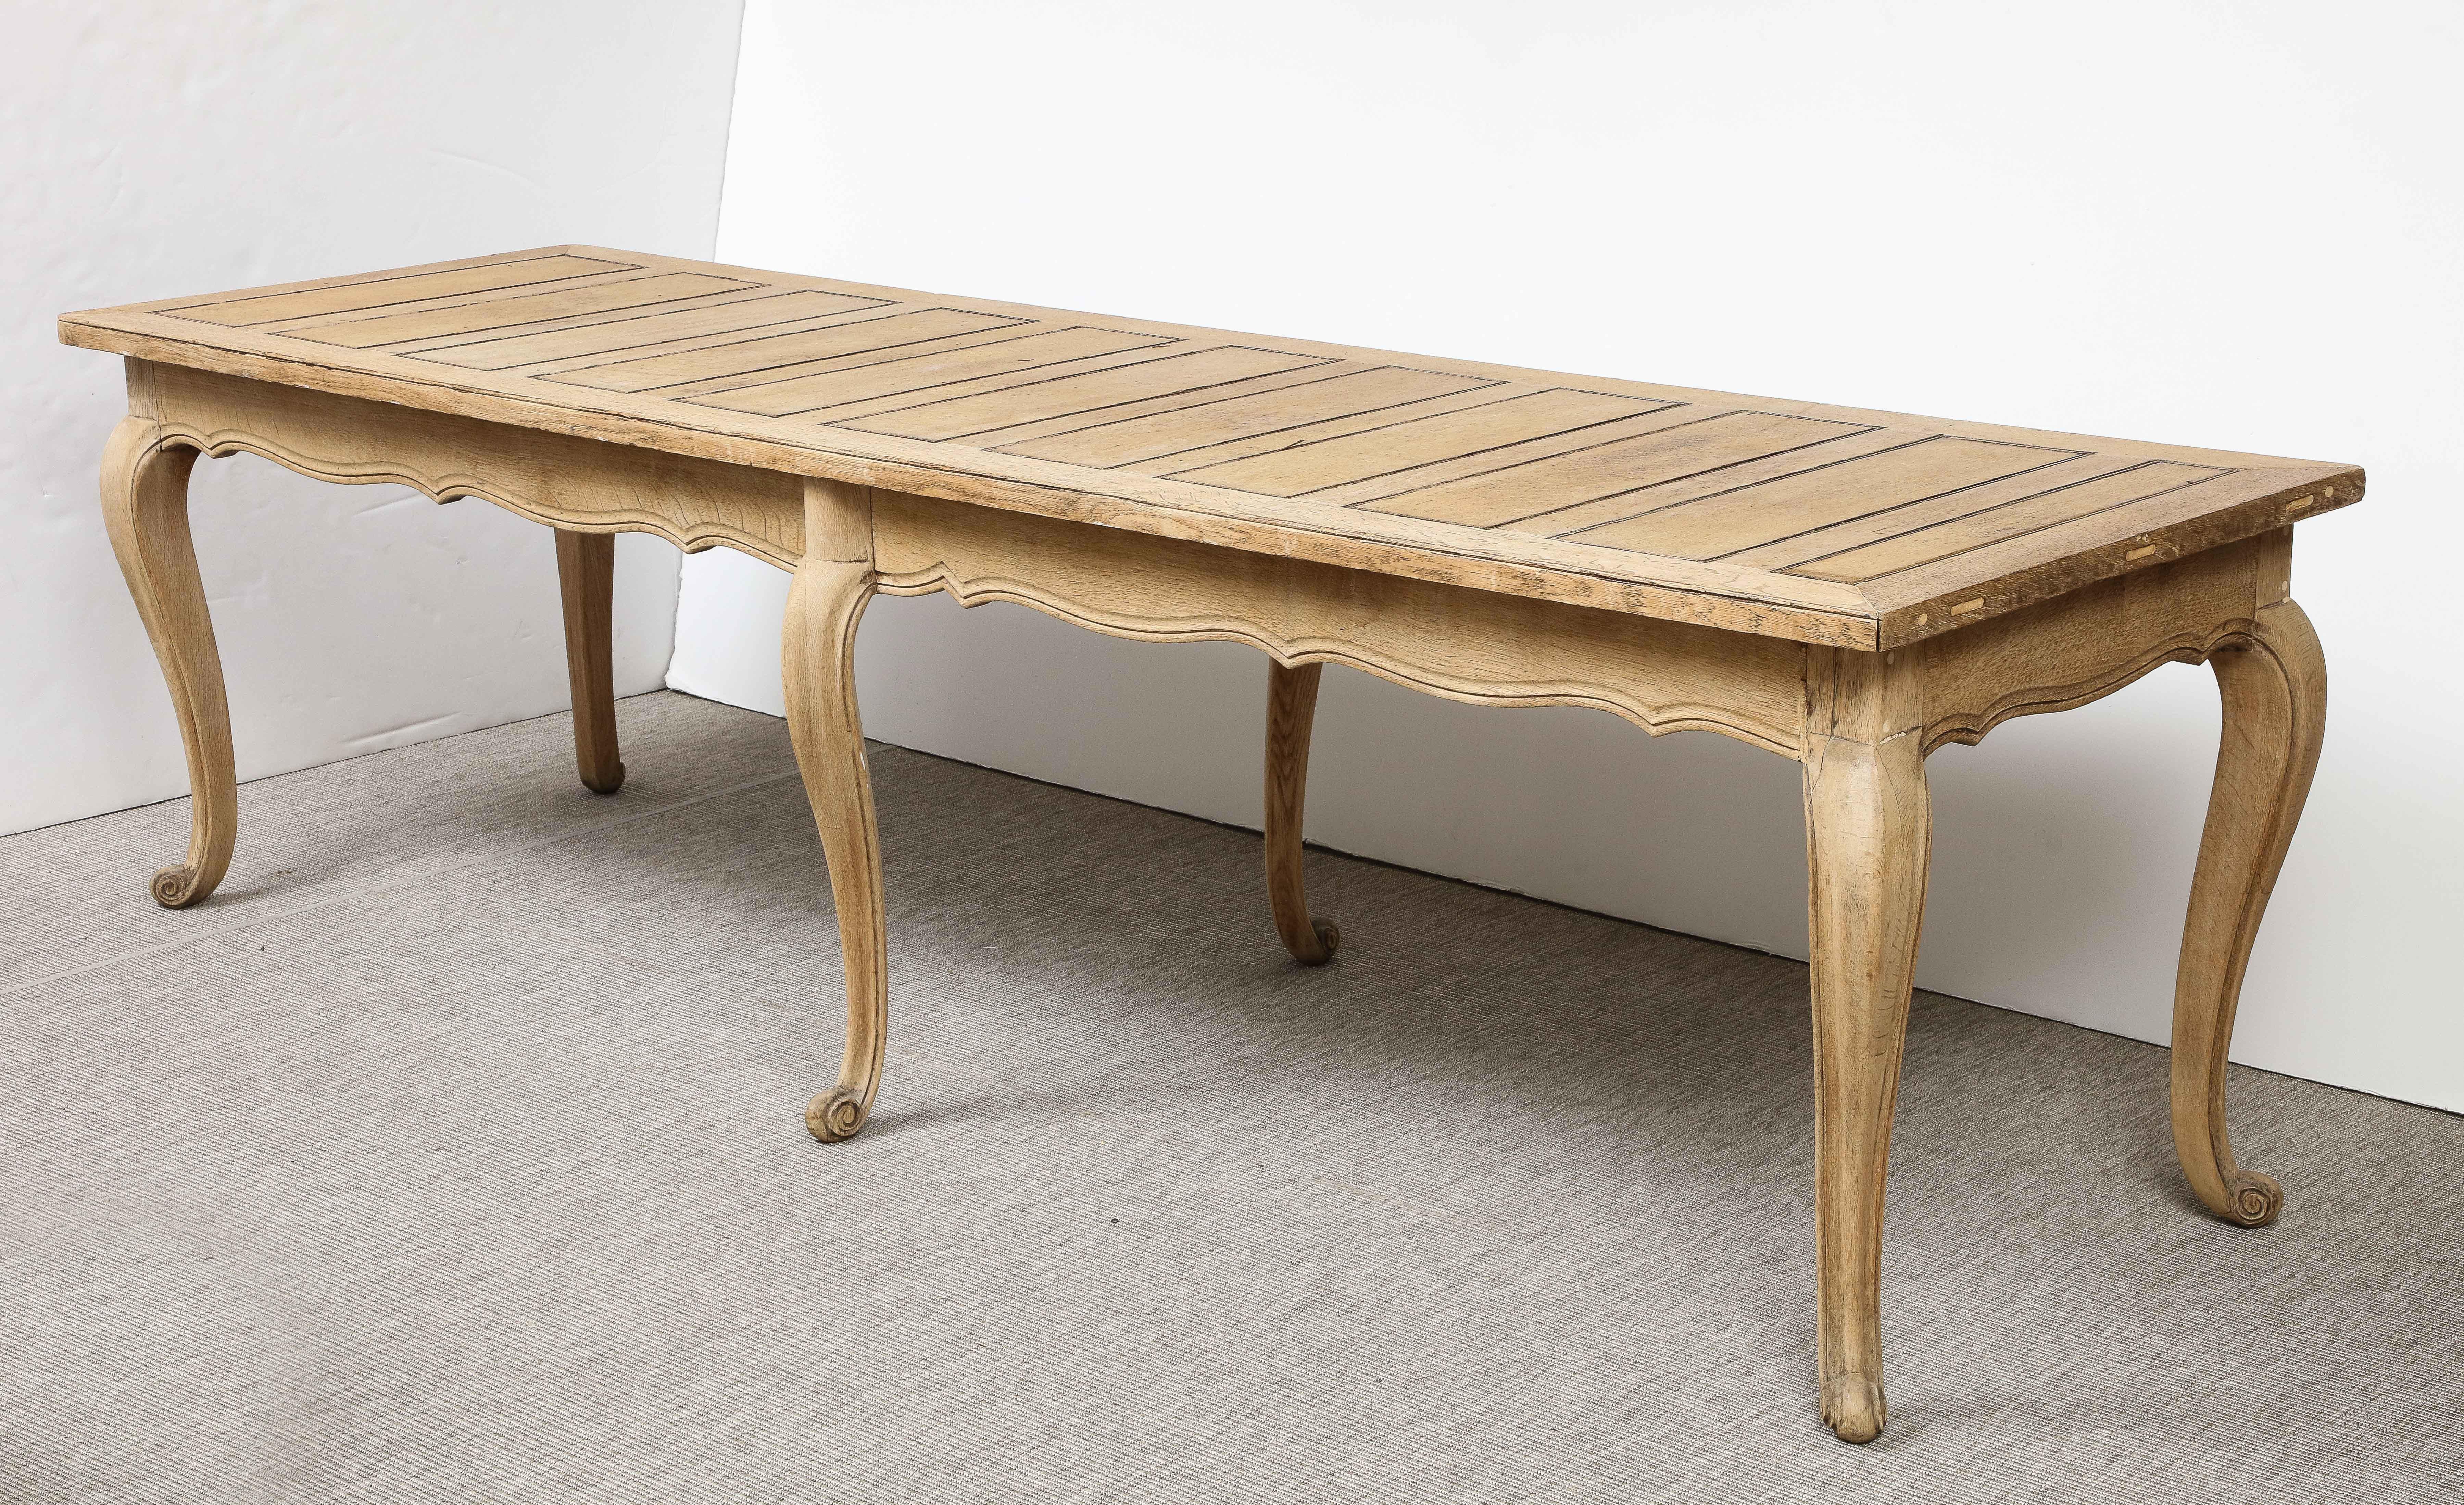 The bleached finish of this chic table gives it a fresh, modern appeal and allows it to work seamlessly in both a contemporary and a traditional setting.  The top consists of several decorative inset panels running the length of the table. True to